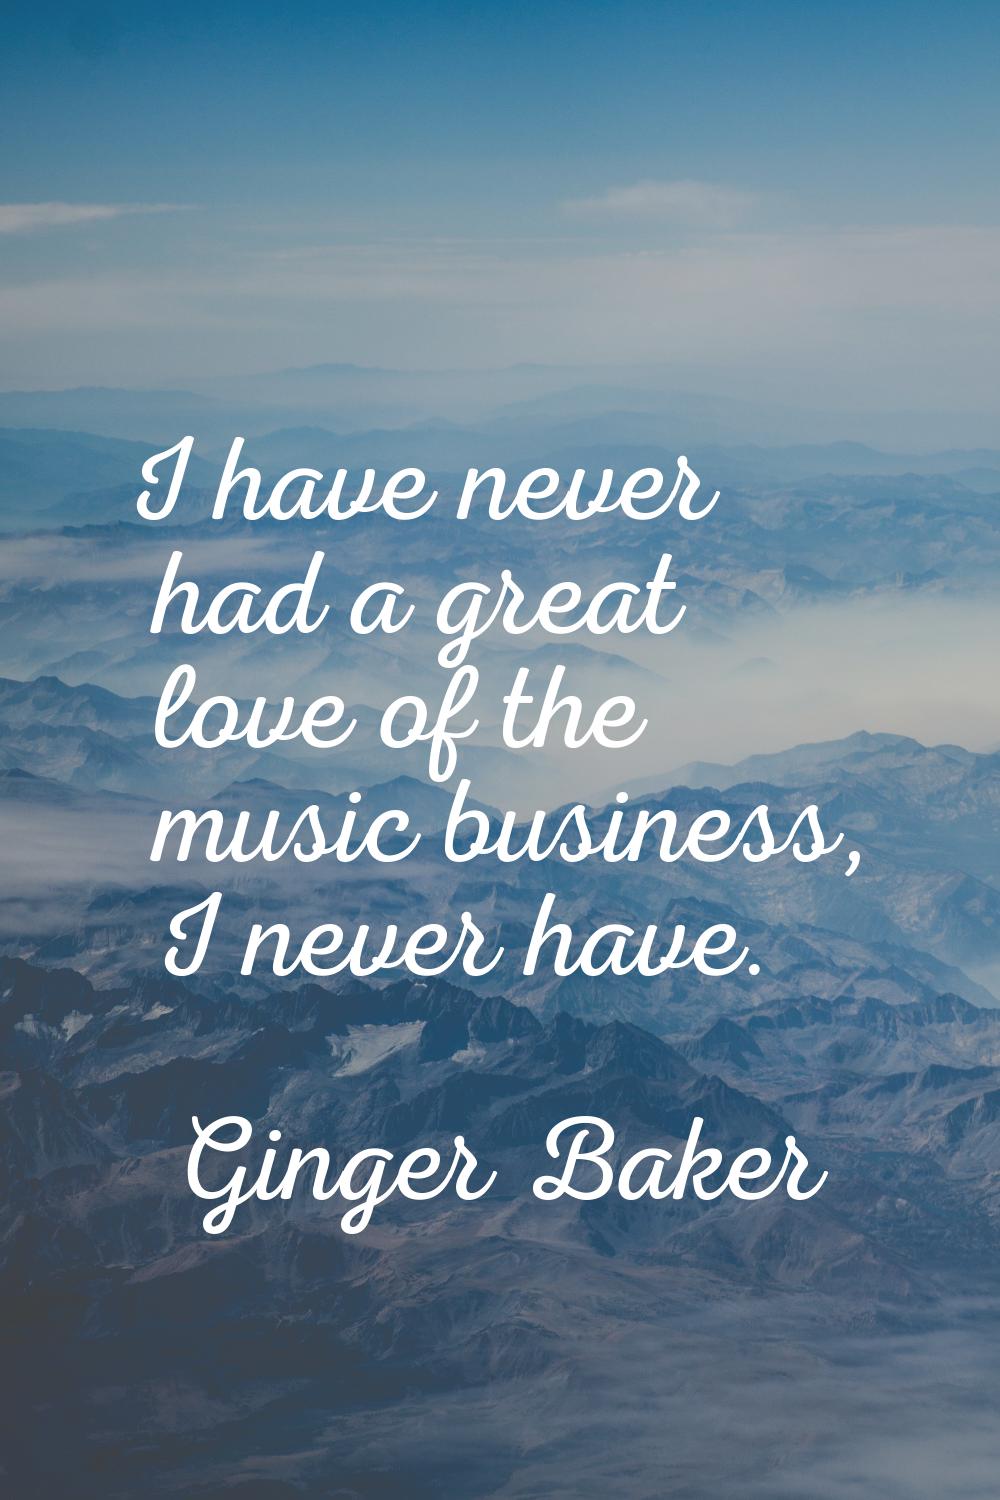 I have never had a great love of the music business, I never have.